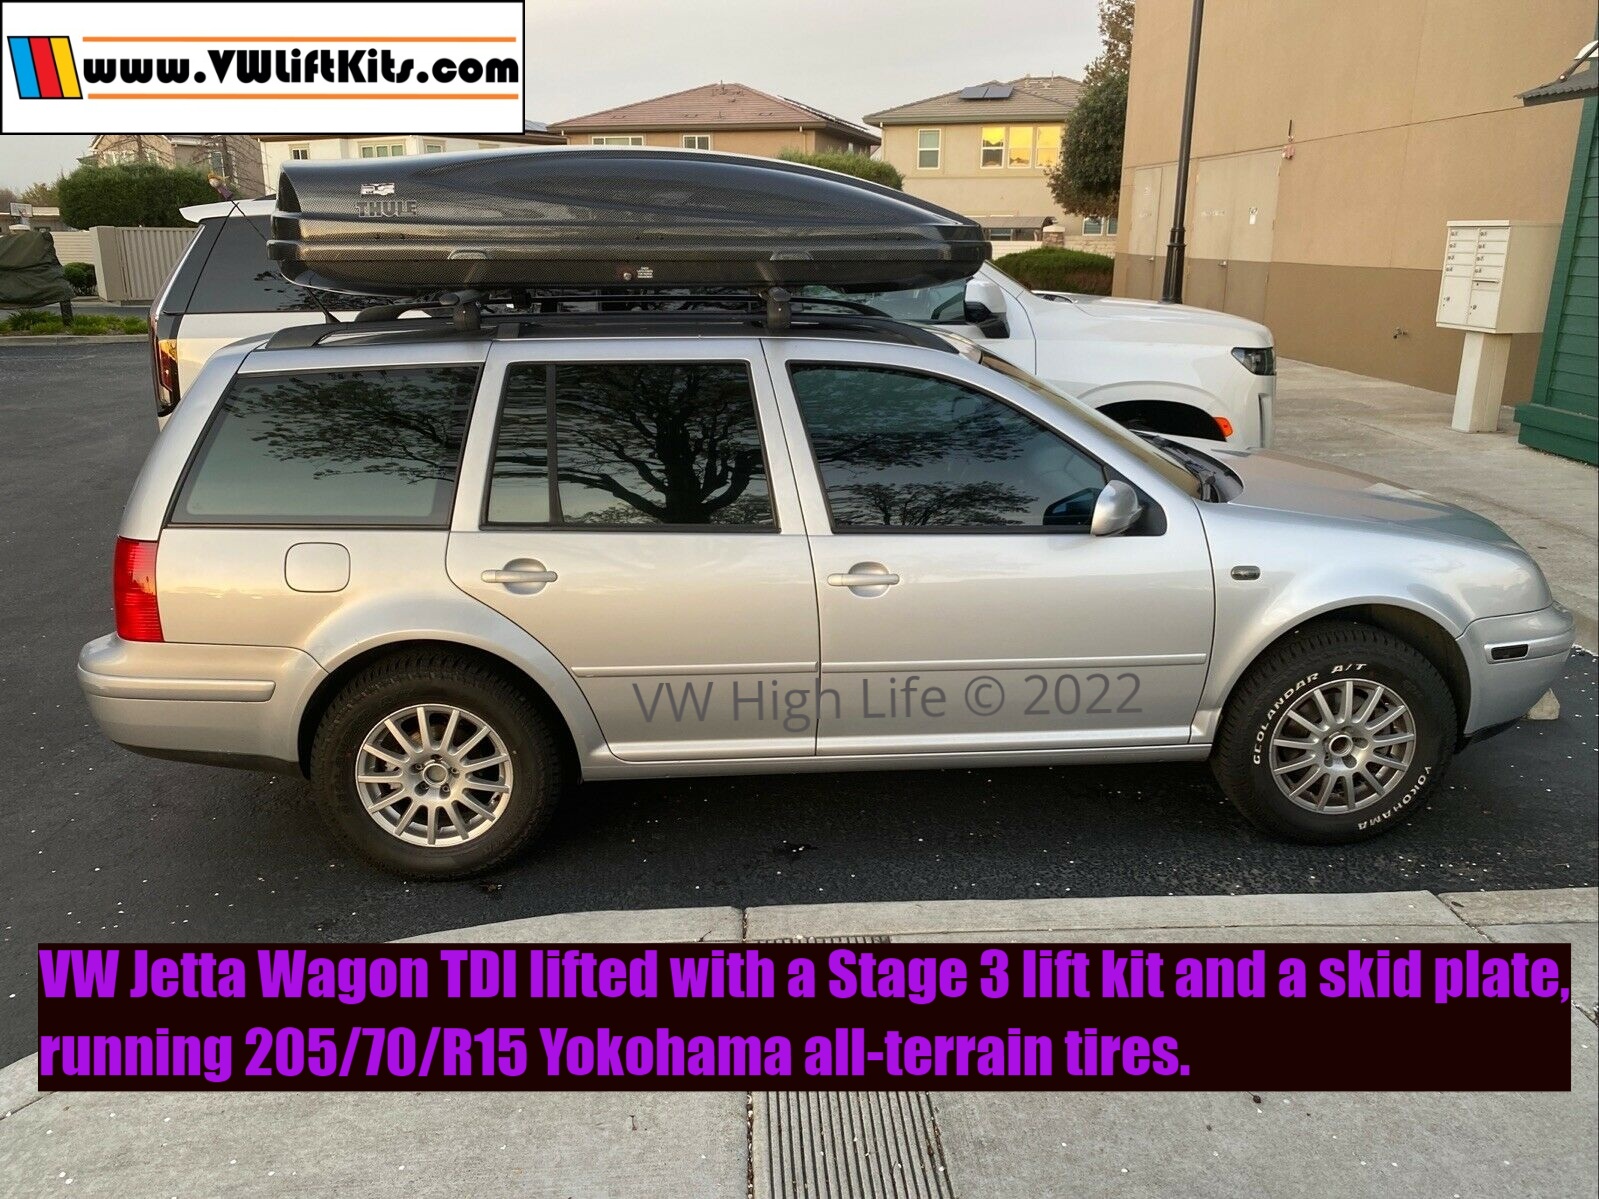 Nestor lifted his MK4 Jetta Wagon TDI to gain more ground clearance and a better quality ride!